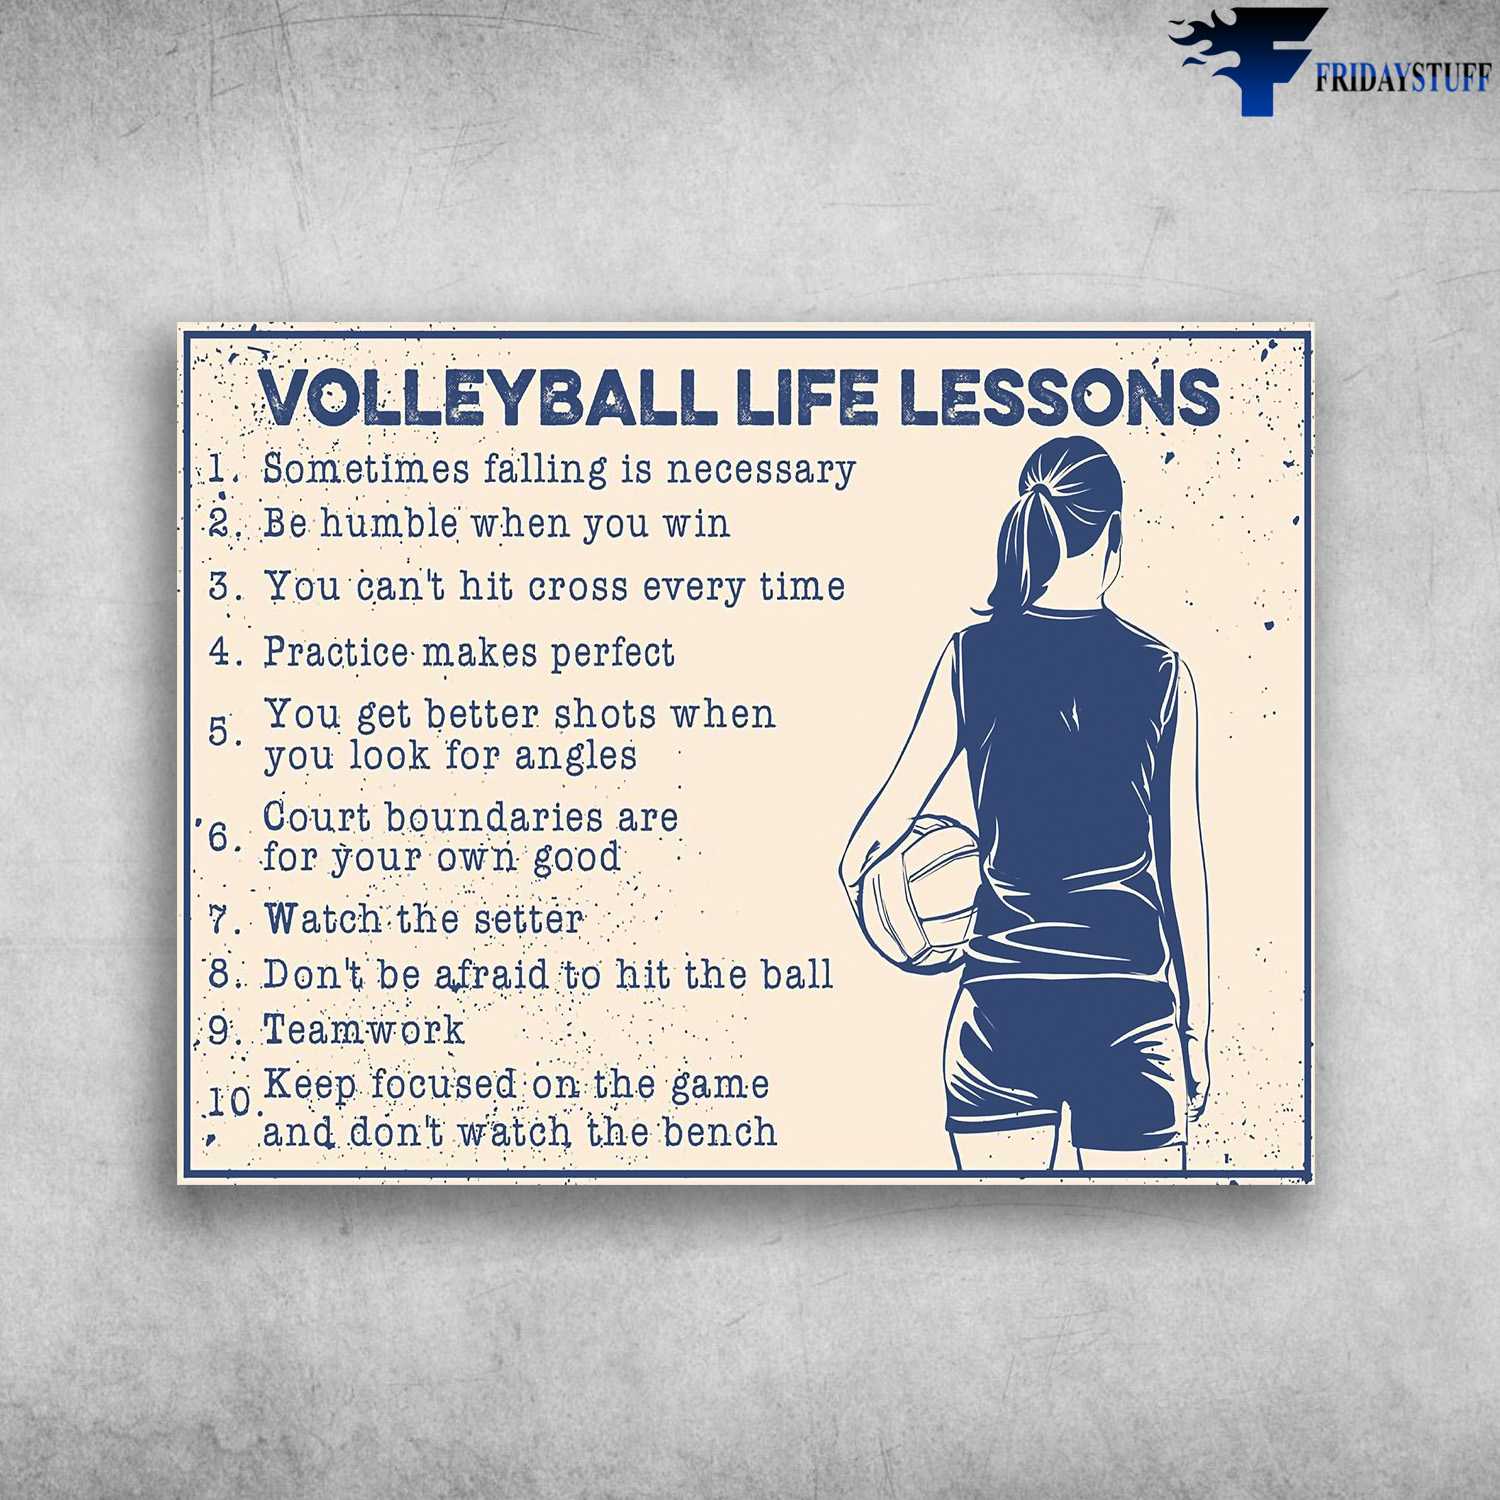 Volleyball Poster, Volleyball Life Lessons - Some Times Falling Is Necessary, Be Humble When You Win, You Can't Hit Cross Every Time, Practice Makes Perfect